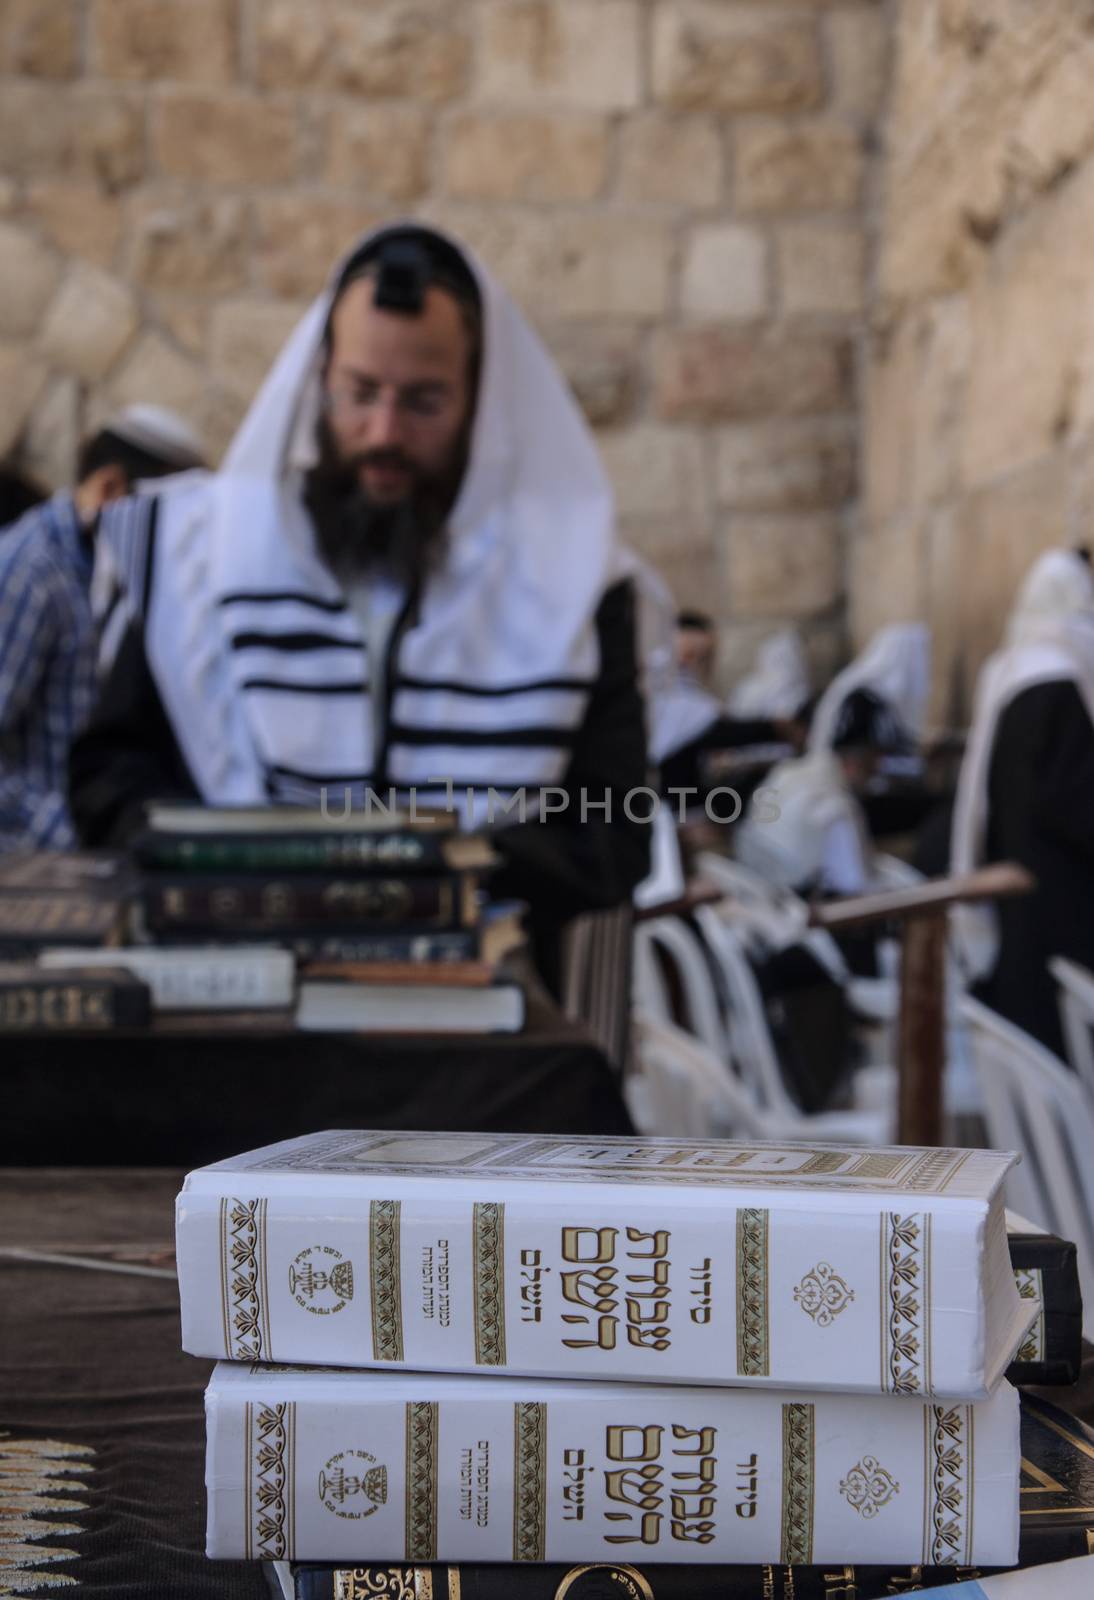 JERUSALEM - JULY 31 - Orthodox Jews prays at the Western Wall, behind praying book (Siddur) - July 31, 2013 in the old city of Jerusalem, Israel. This is the holiest place in Jewish tradition